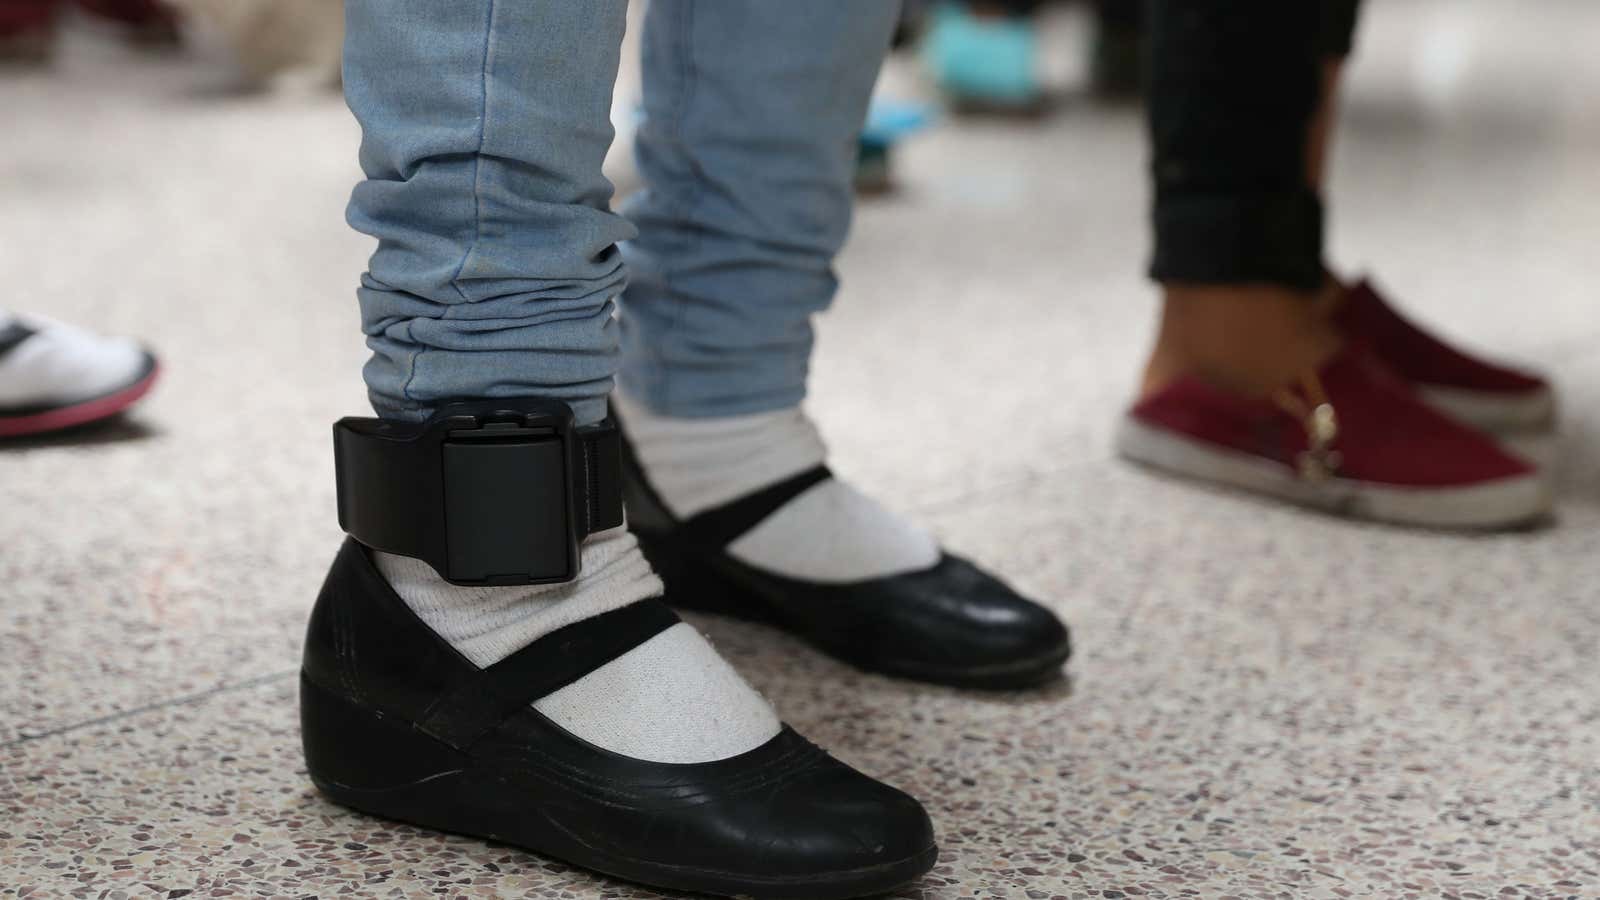 Parents can fit teens with a more feature-rich version of the ankle monitor worn by immigrants captured by ICE.